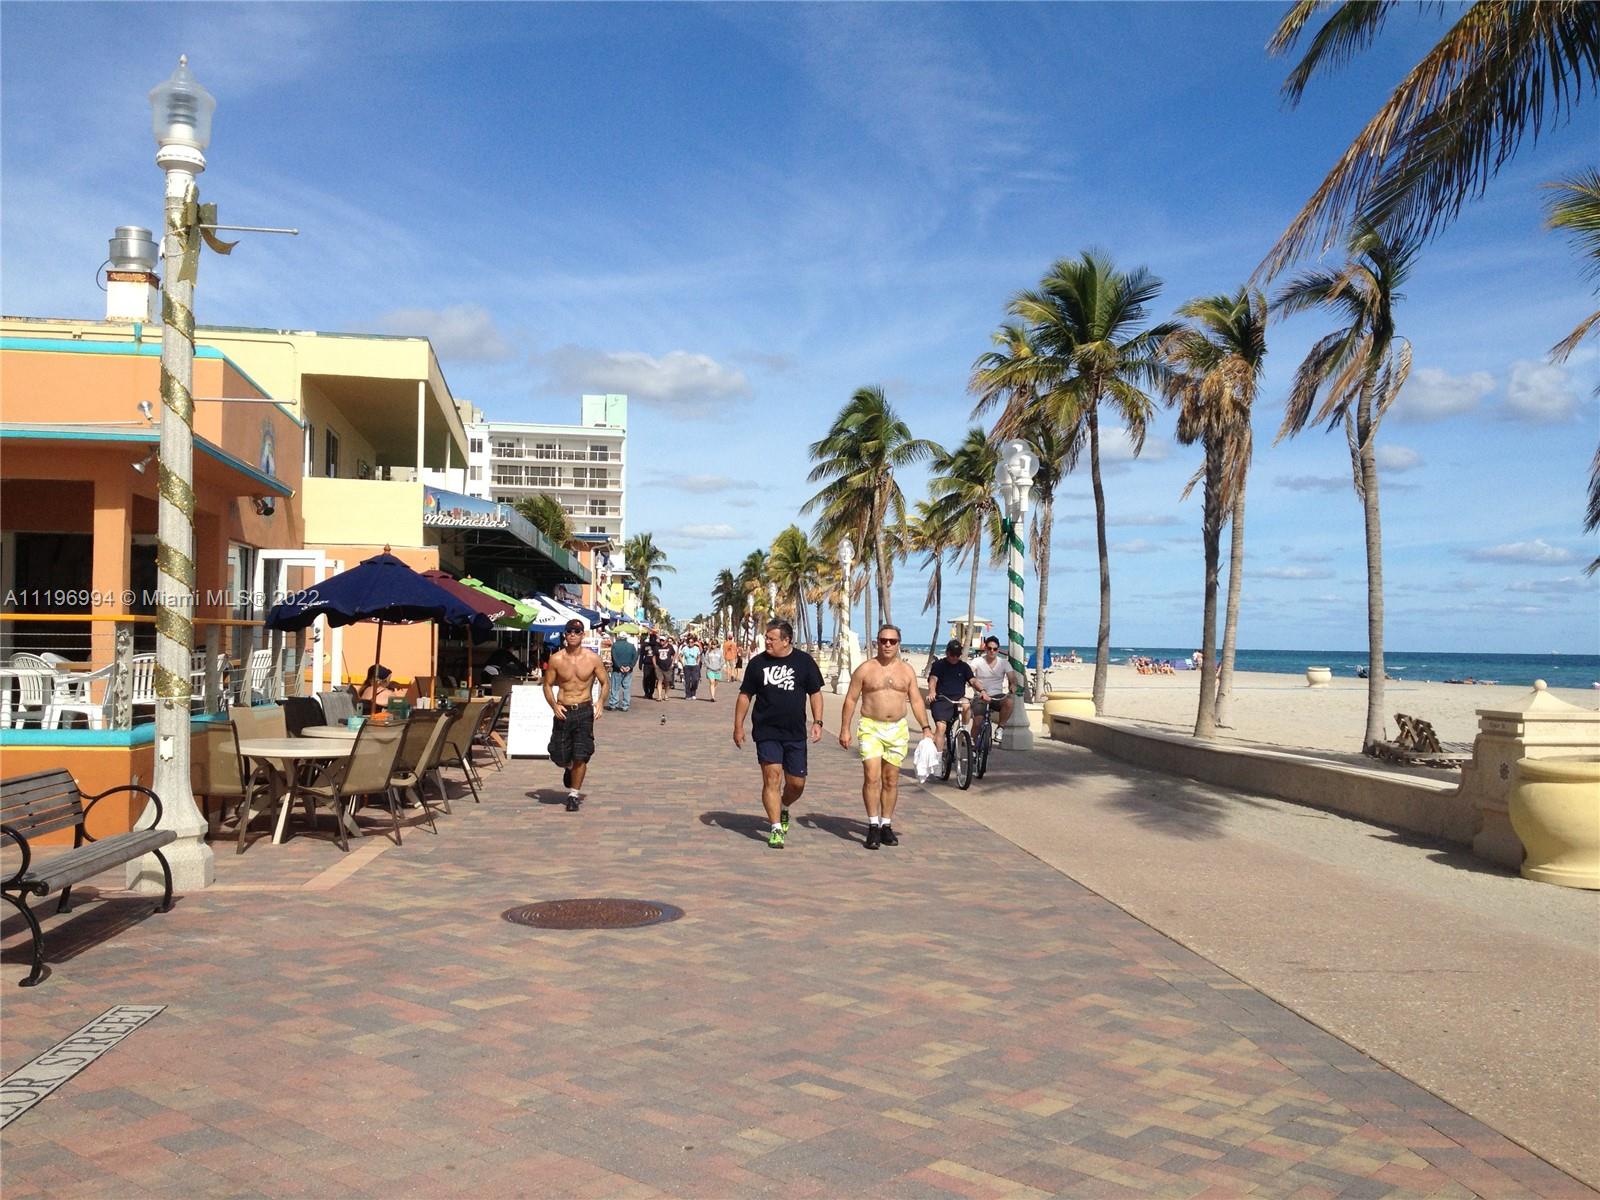 Exercise or grab a meal along the beach at the famous Hollywood Broadwalk nearby